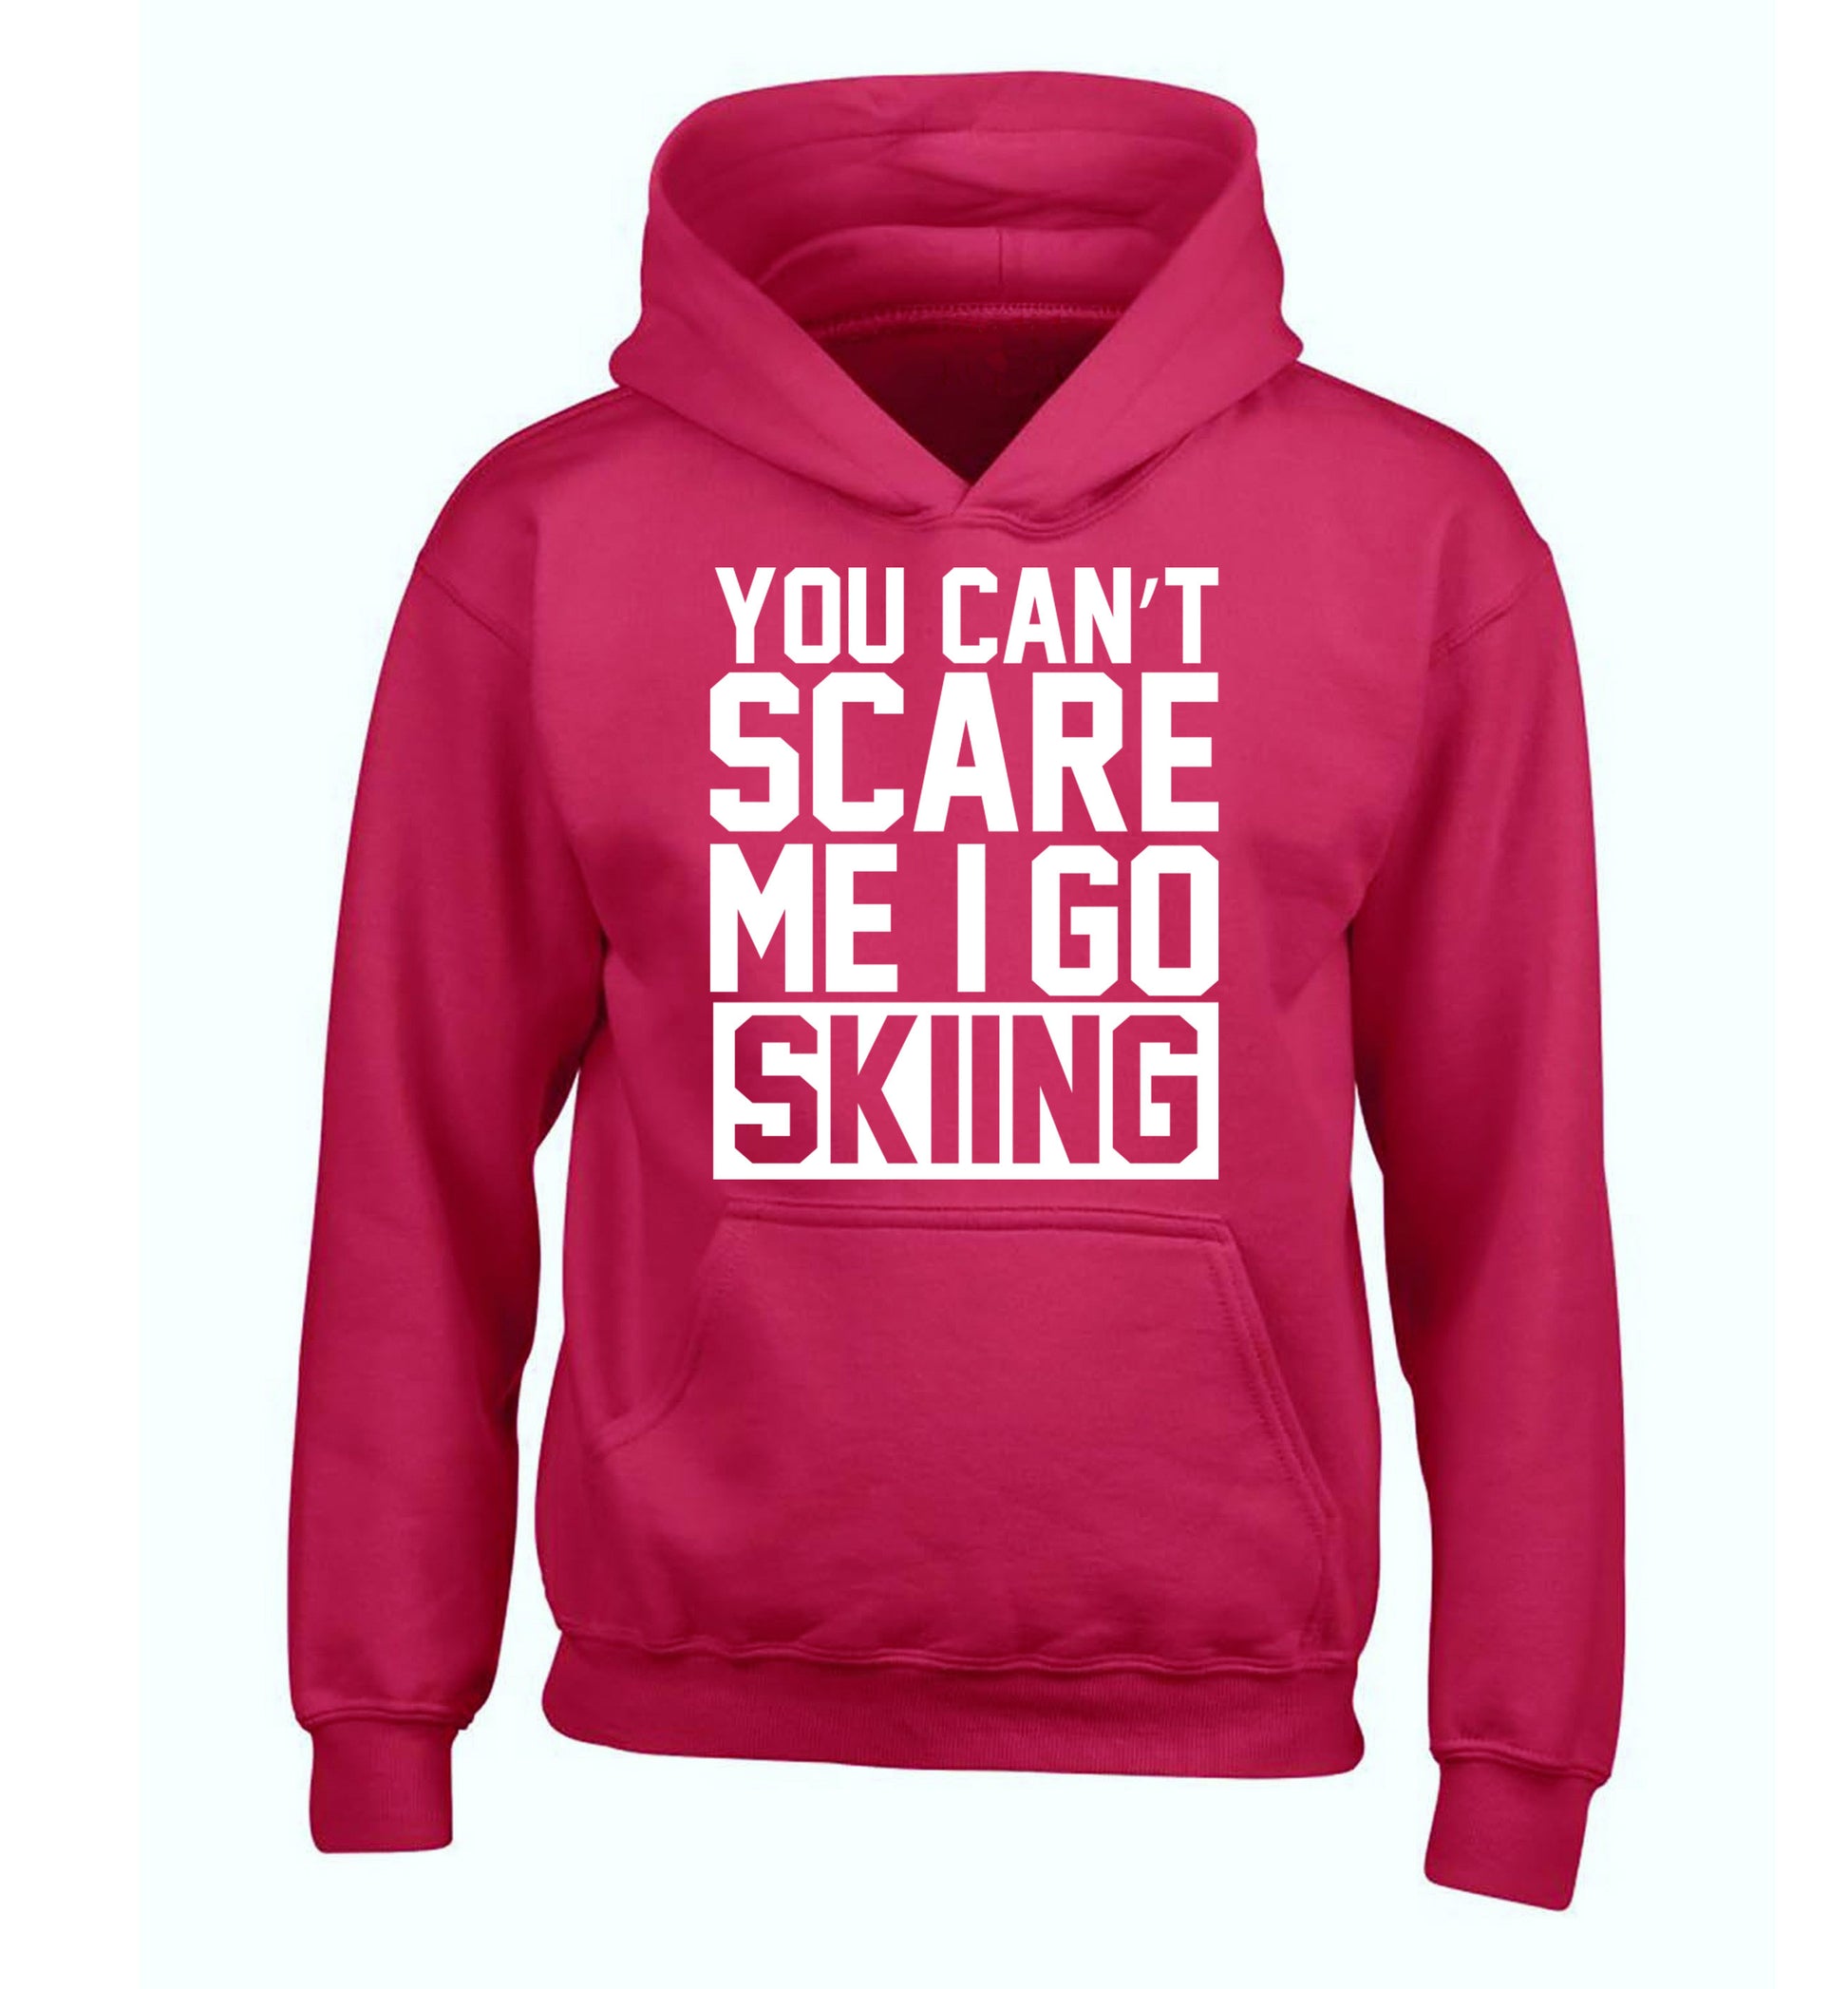 You can't scare me I go skiing children's pink hoodie 12-14 Years